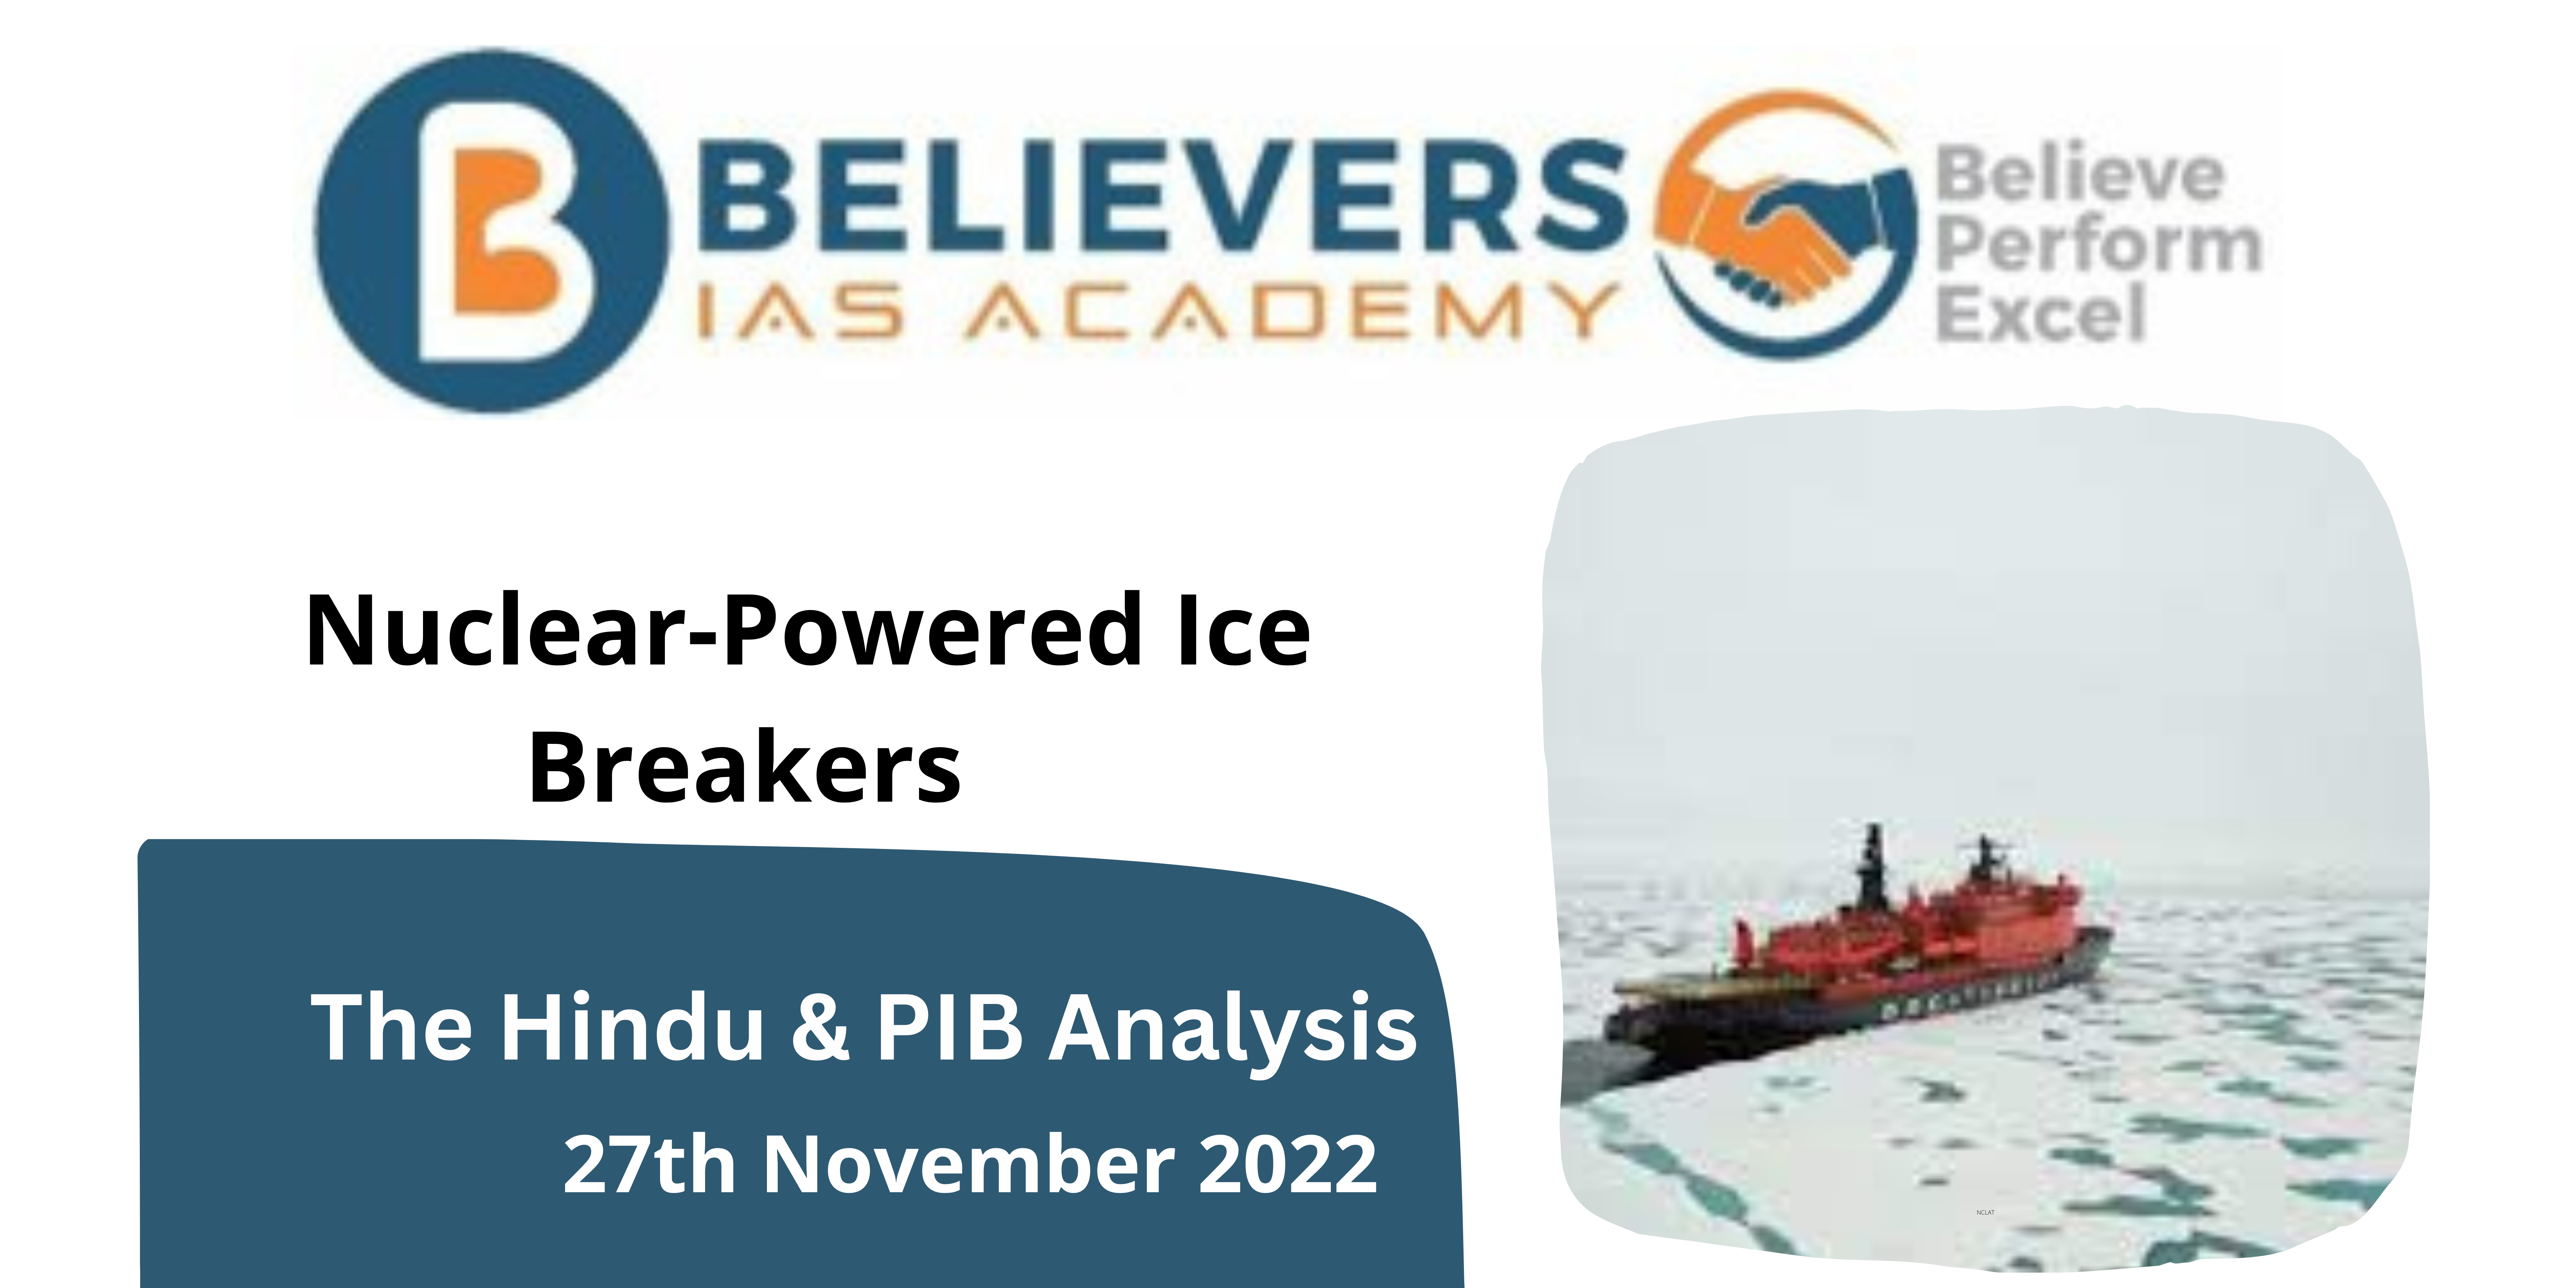 Nuclear-Powered Ice Breakers